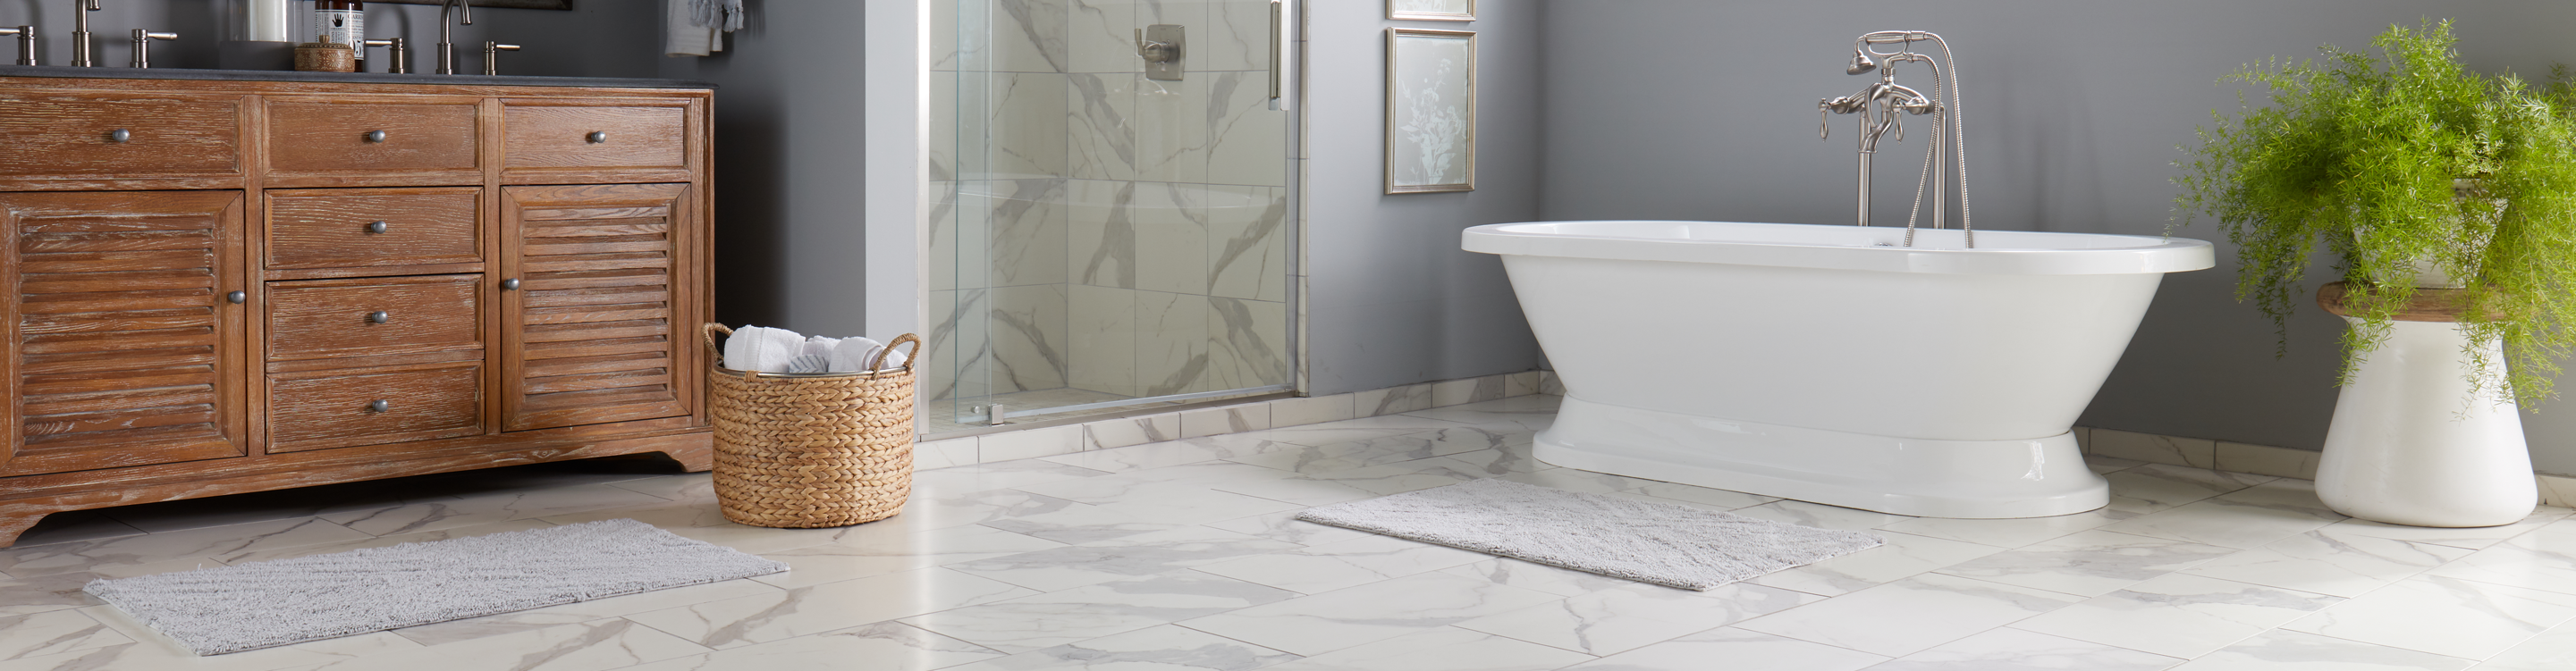 marble tile flooring and shower wall in a bathroom